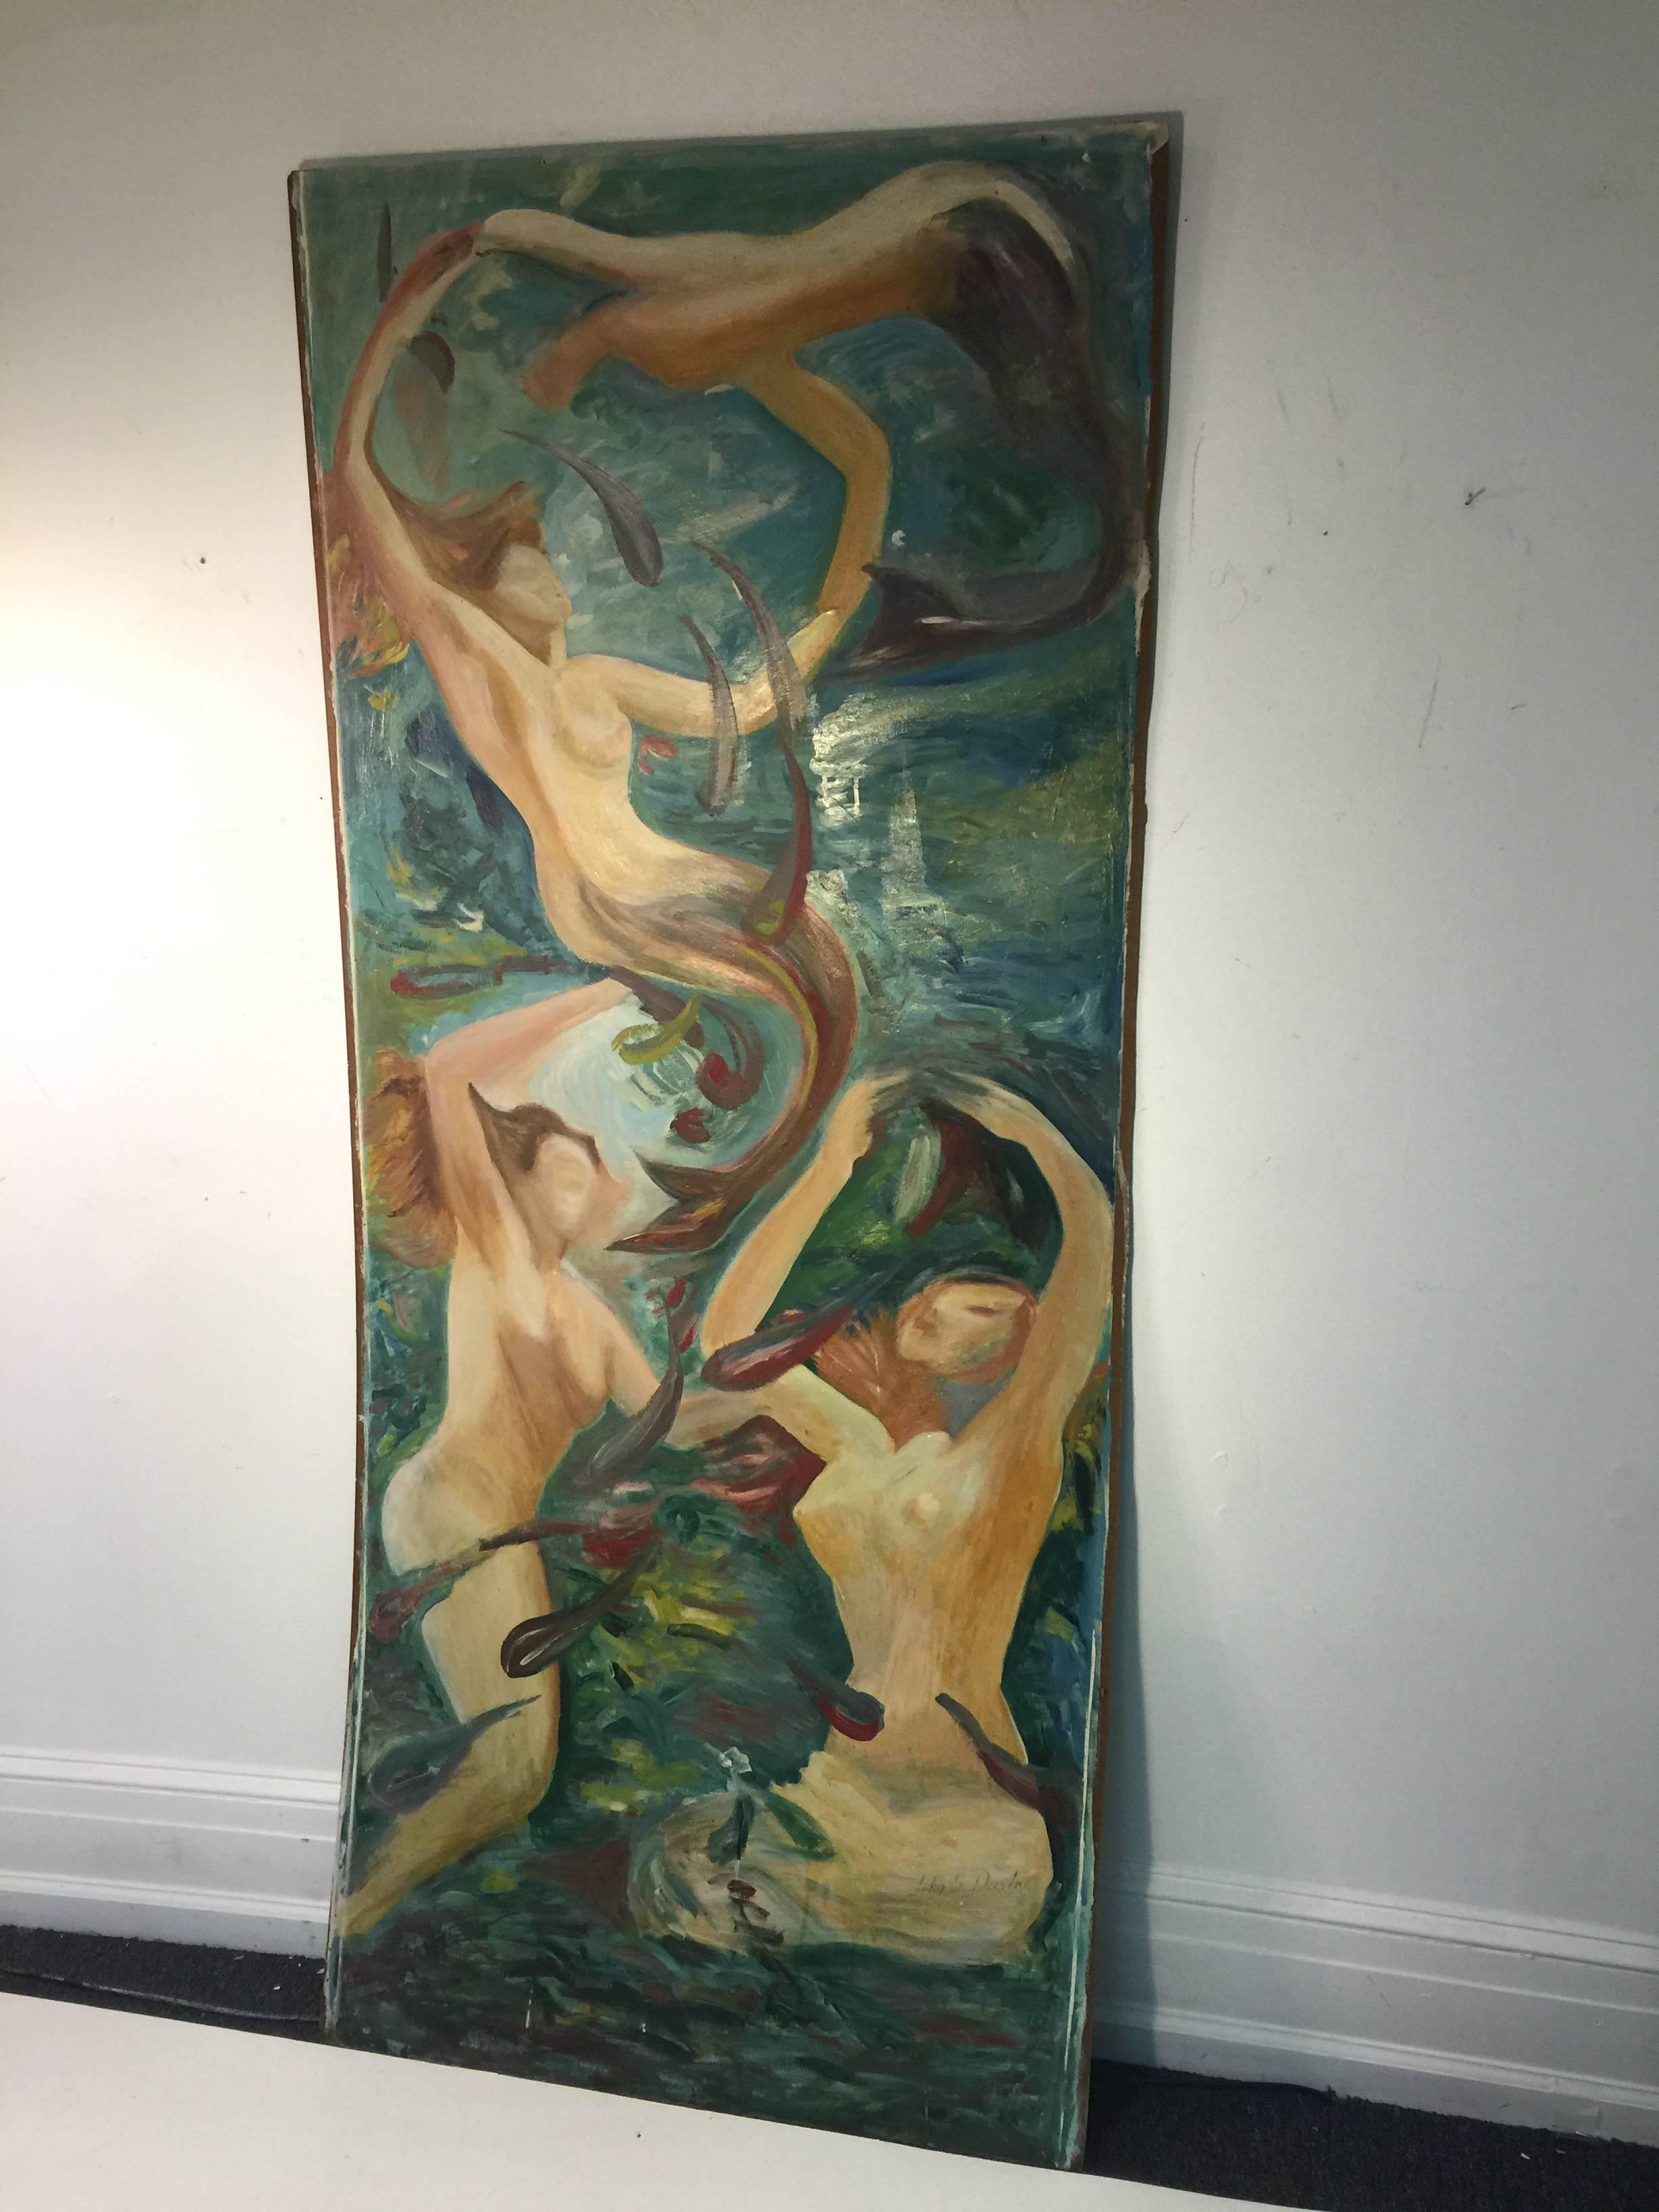 Oil painting on Masonite of Mermaids swimming amongst fish painted by John Dasho. Painted in the 1950s-1960s.